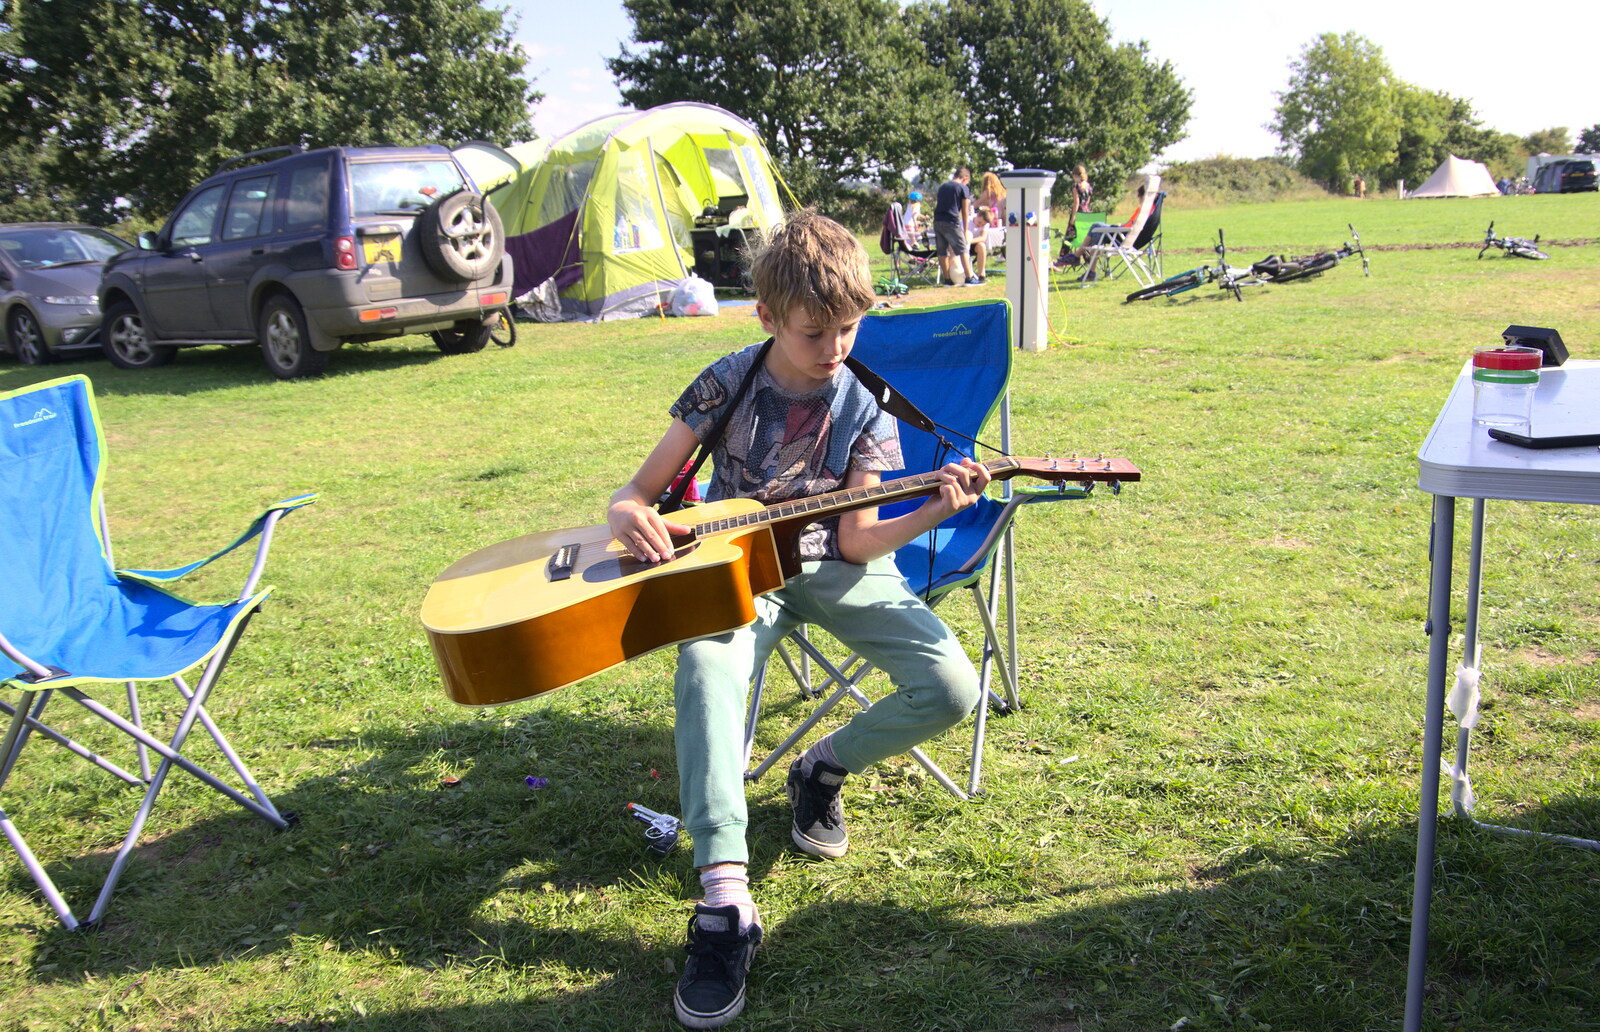 The next morning, Fred plays some guitar from A Spot of Camping, Alton Water, Stutton, Suffolk - 1st September 2018